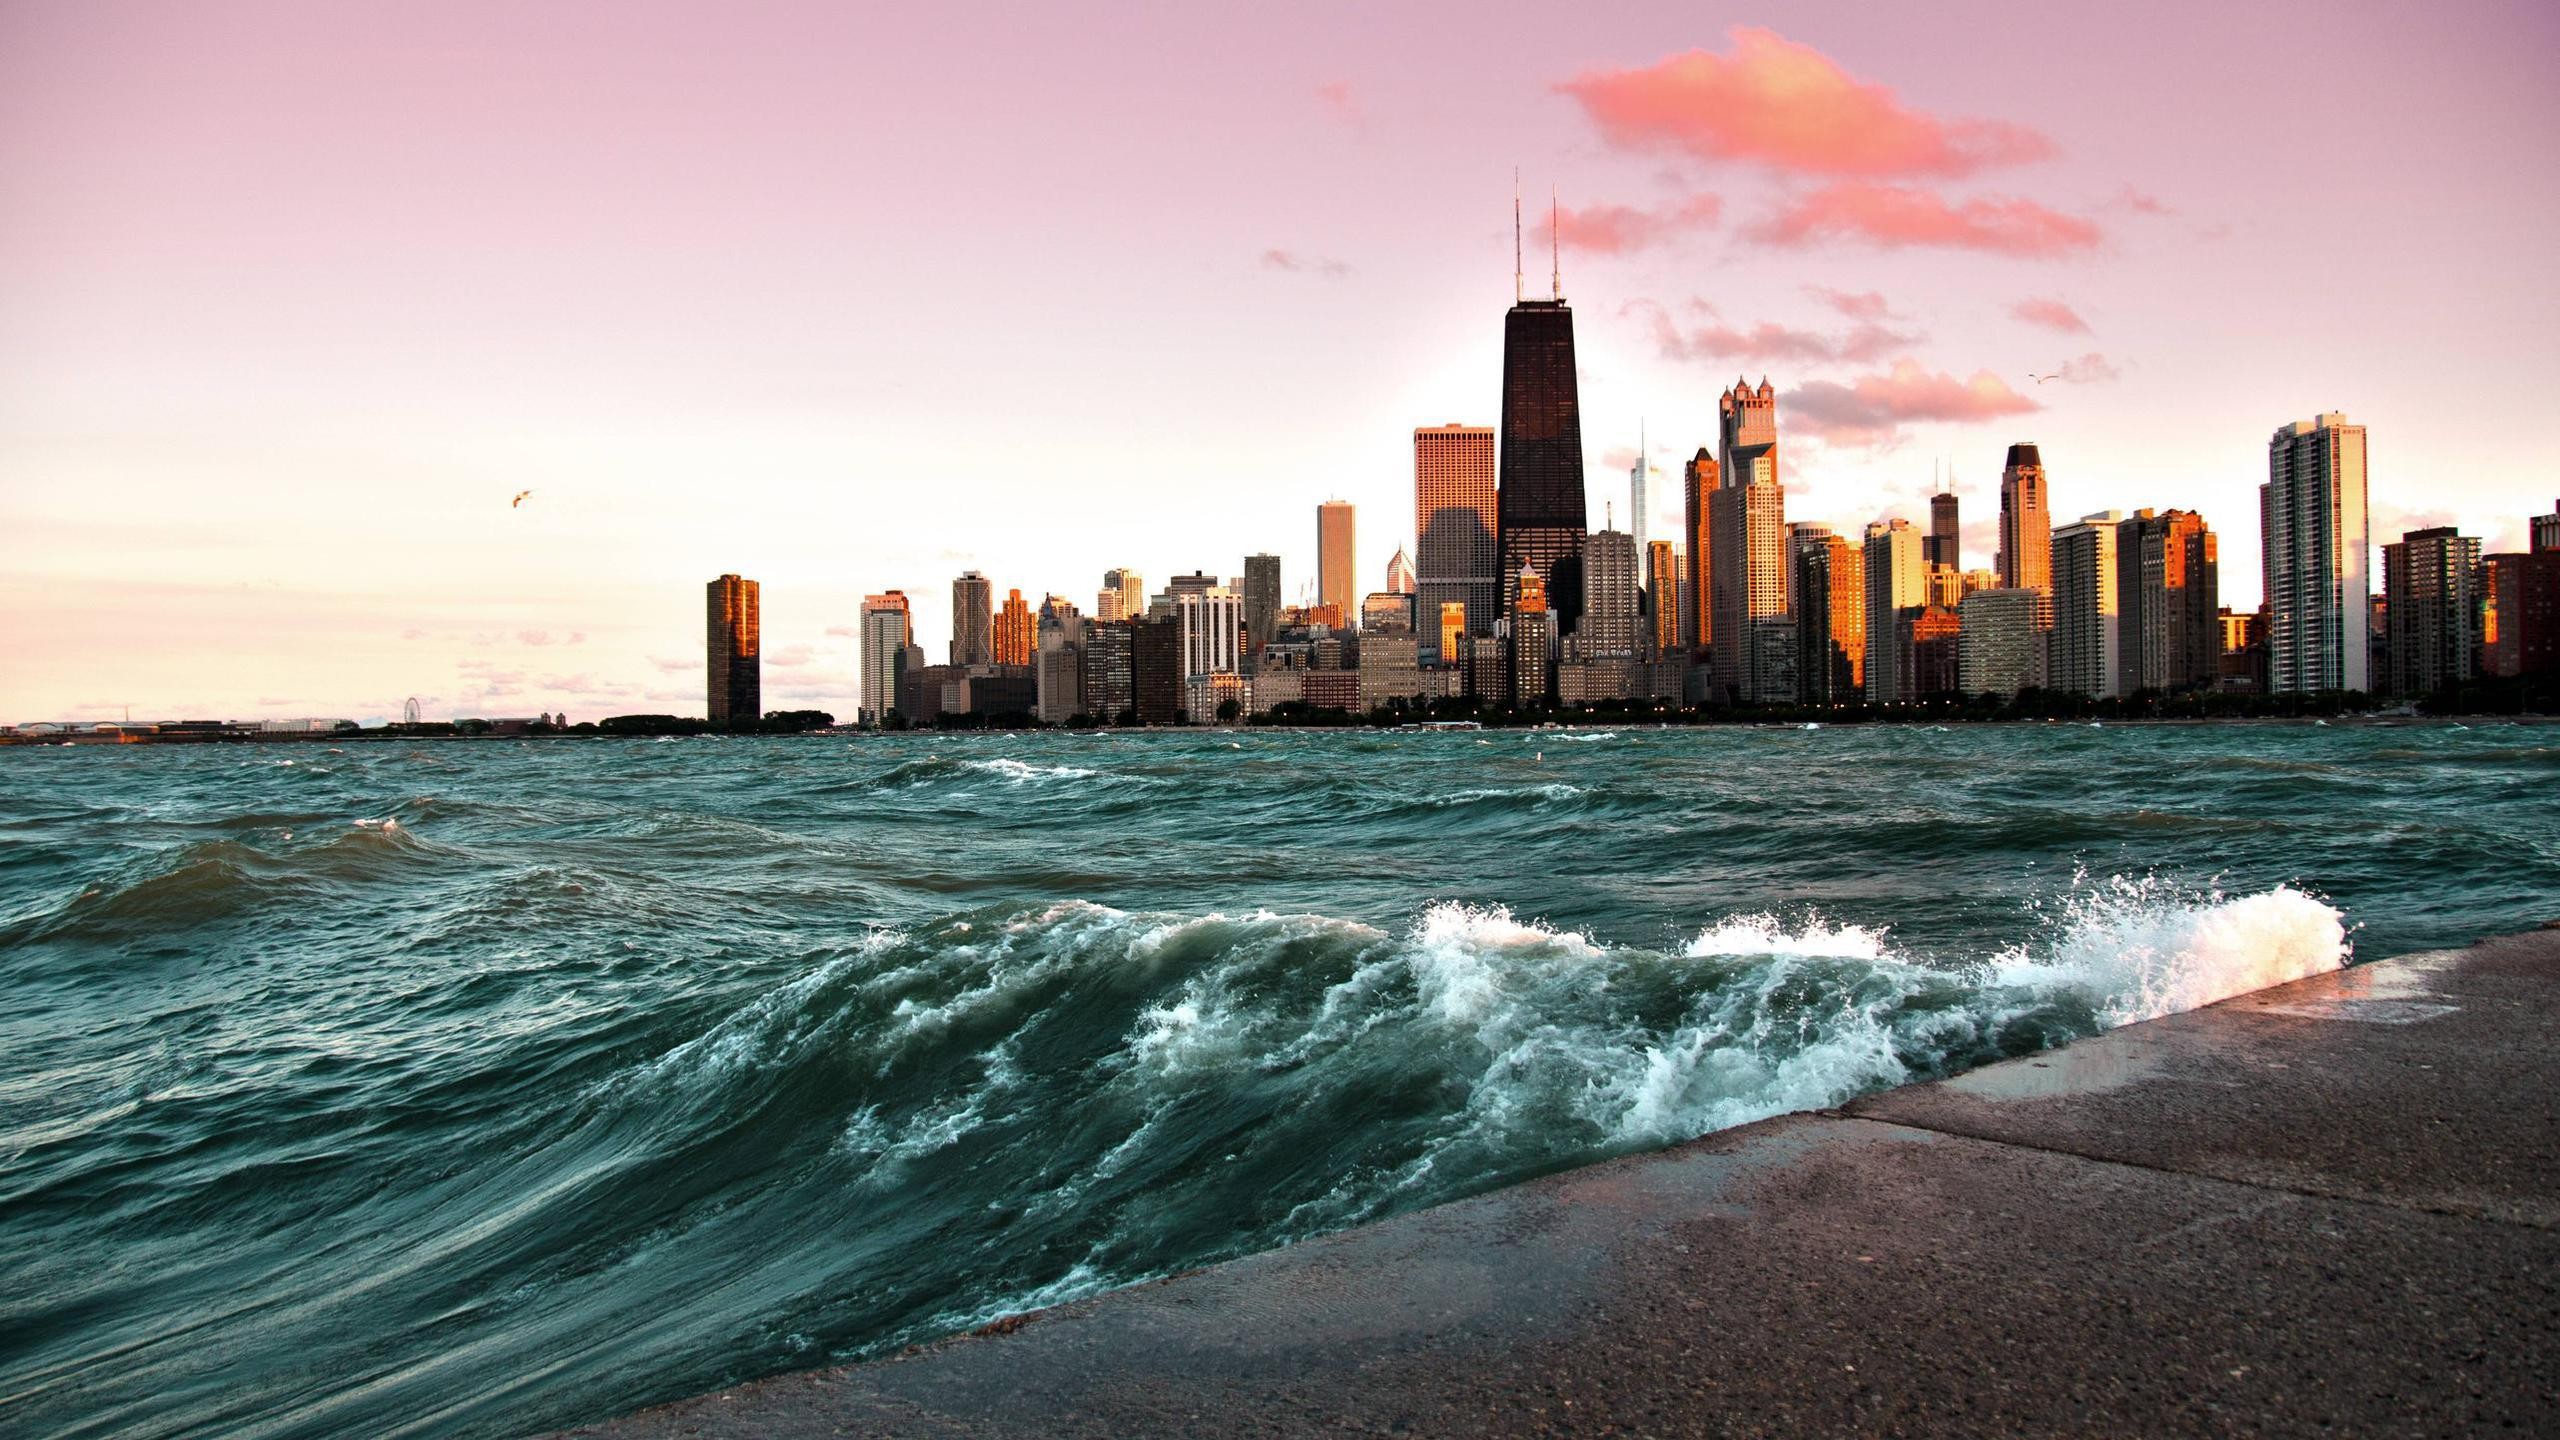 General 2560x1440 photography water waves cityscape urban skyscraper building Chicago USA sky